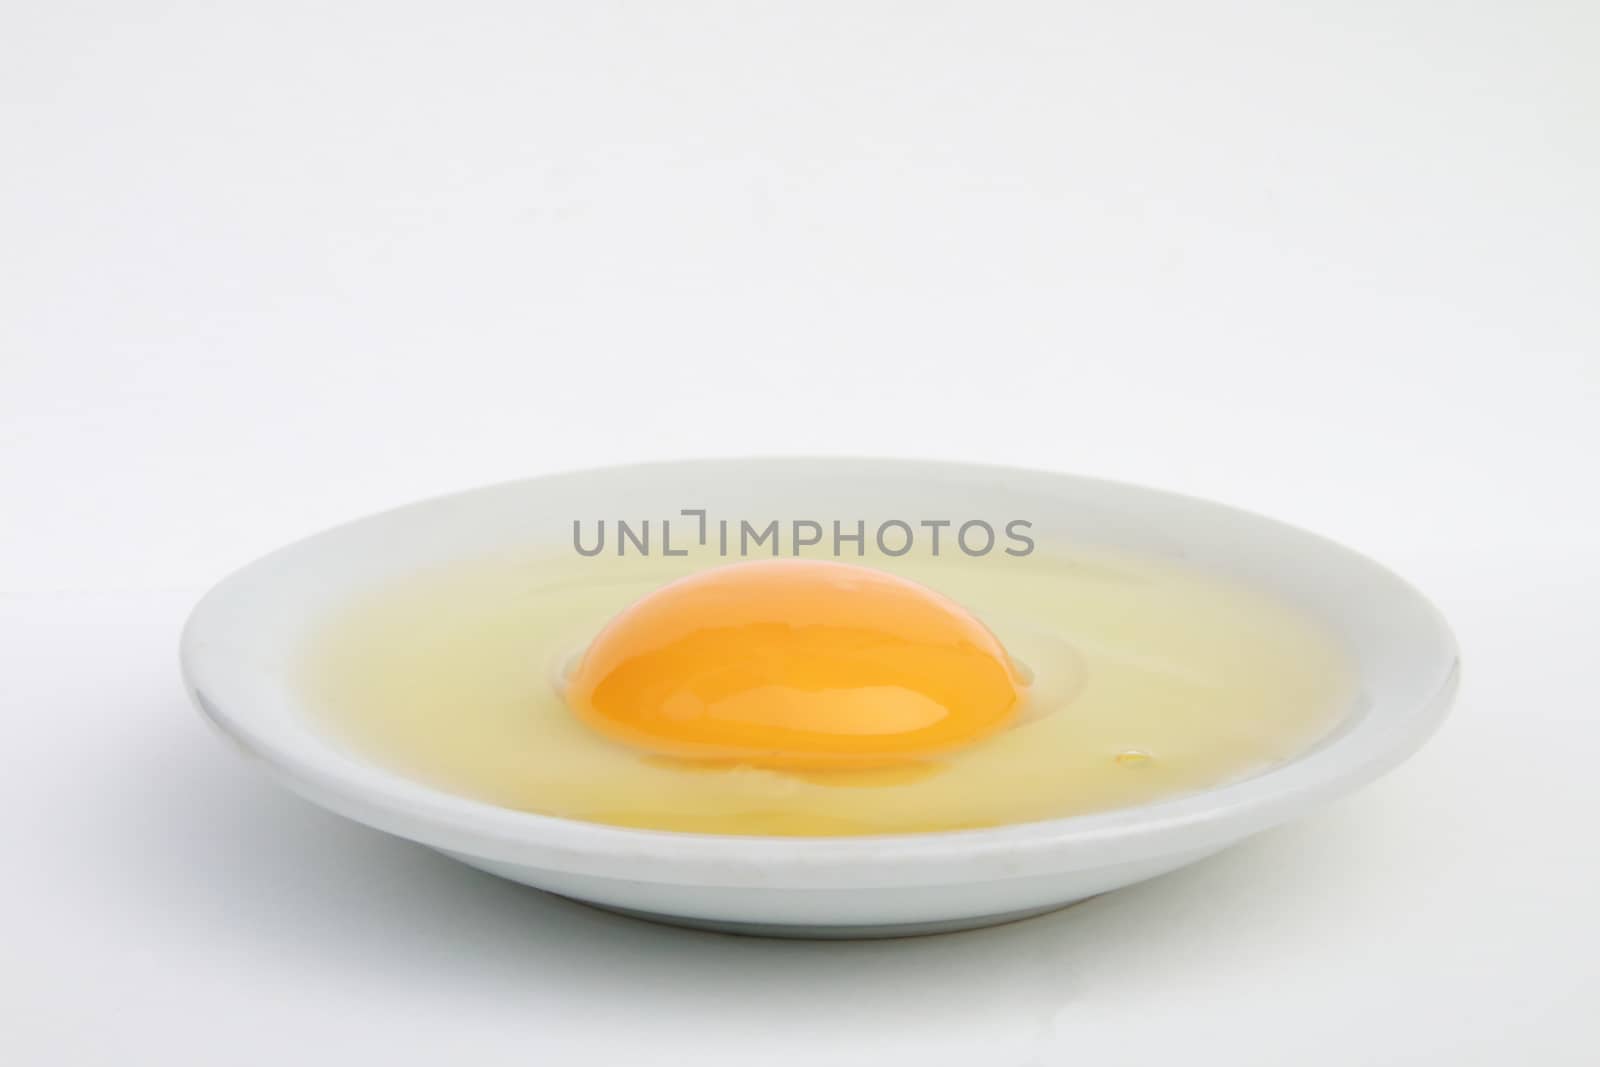 raw egg in the plate by kaidevil